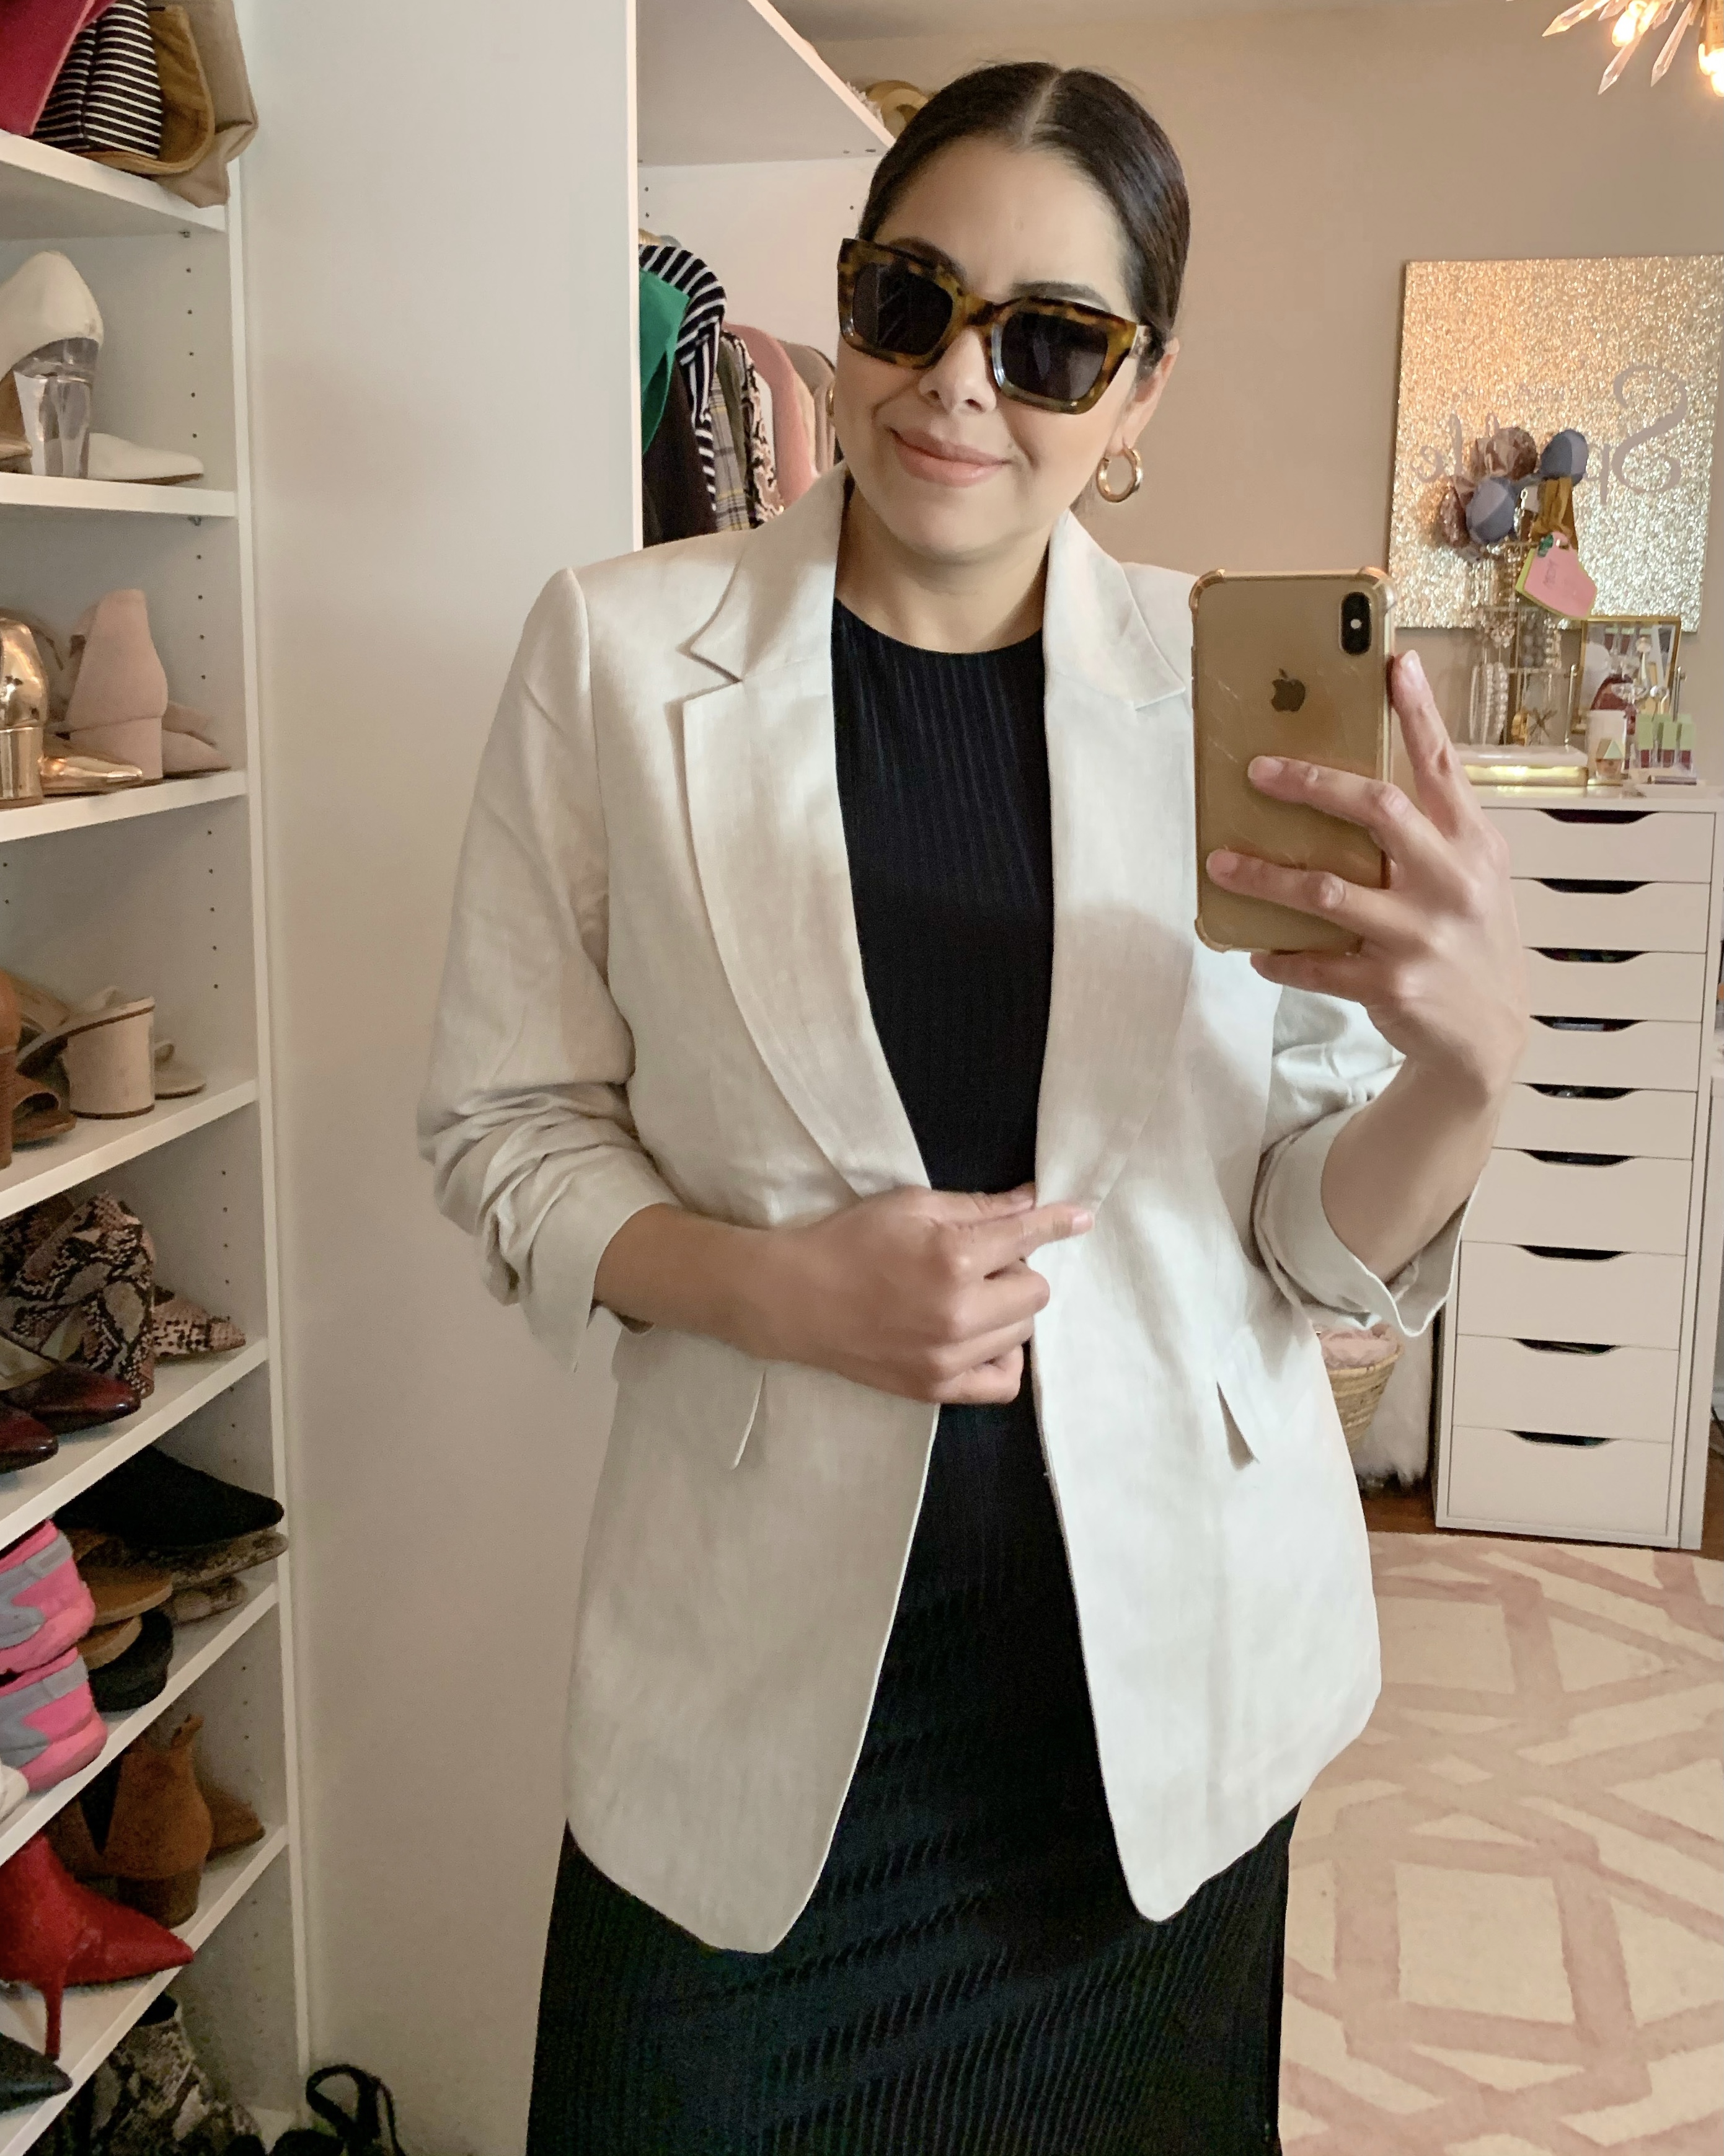 Affordable Chic Clothing Haul, amazon fashion sunglasses, cool sunnies under $20